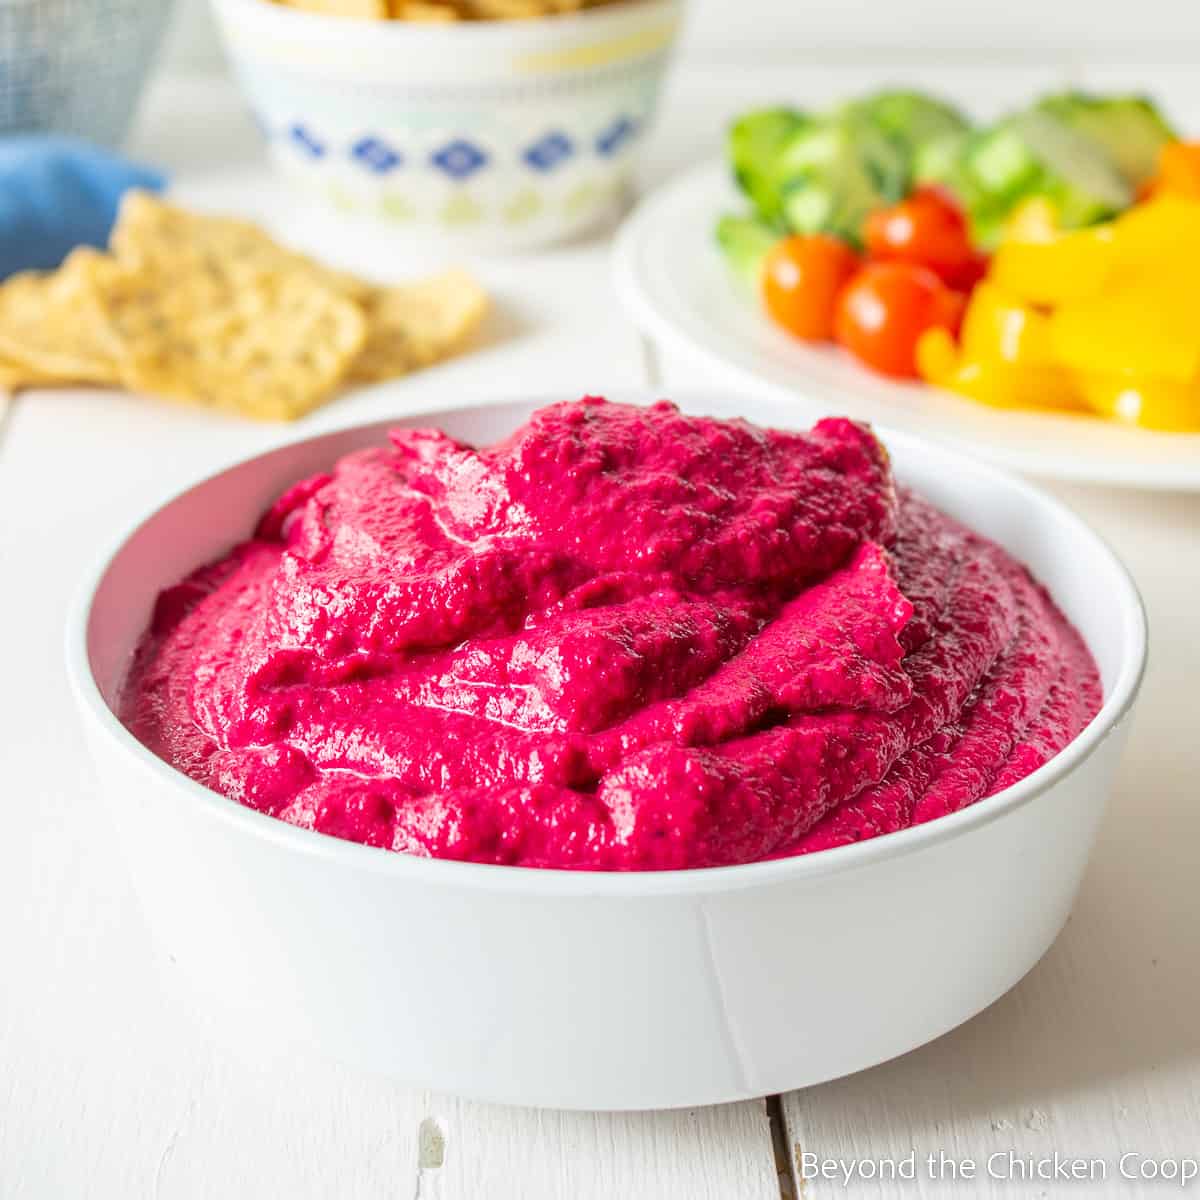 A bowl filled with bright pink hummus.